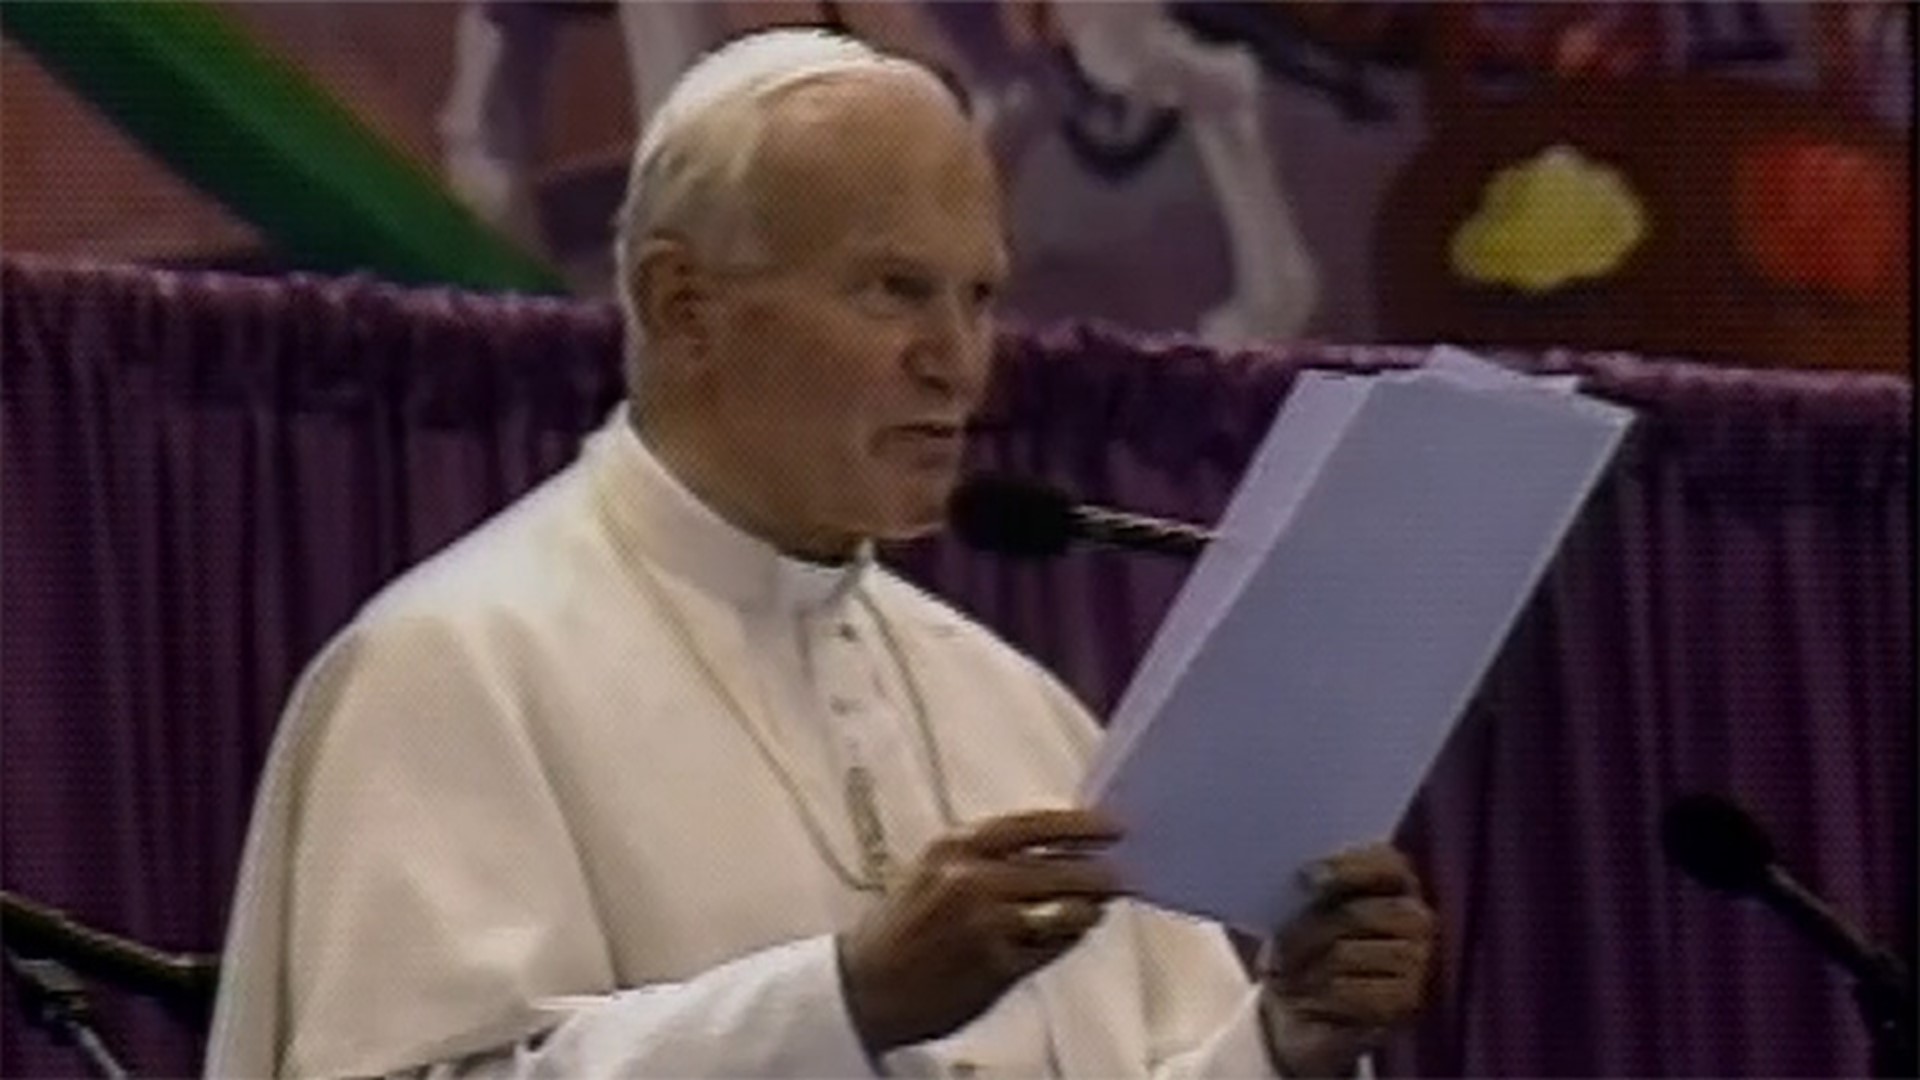 Pope John Paul II made a rare and special visit to the United States in 1987, with a stop in New Orleans. WWL-TV produced a documentary on his visit.